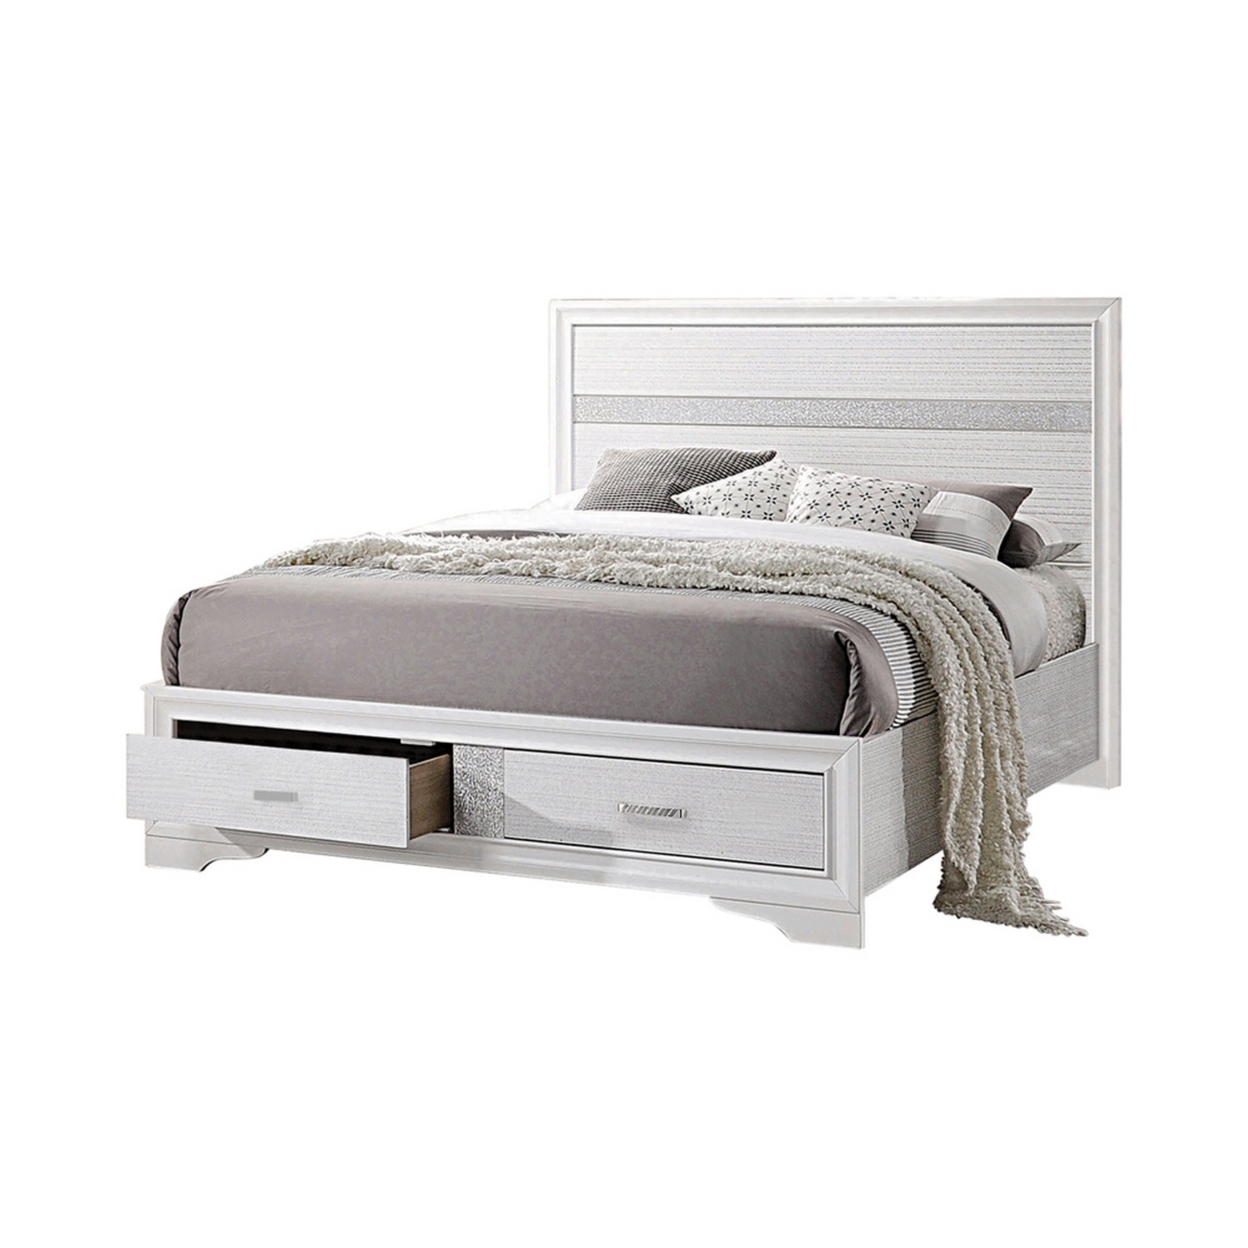 Contemporary Queen Bed With Drawers And Glittering Stripes, White- Saltoro Sherpi